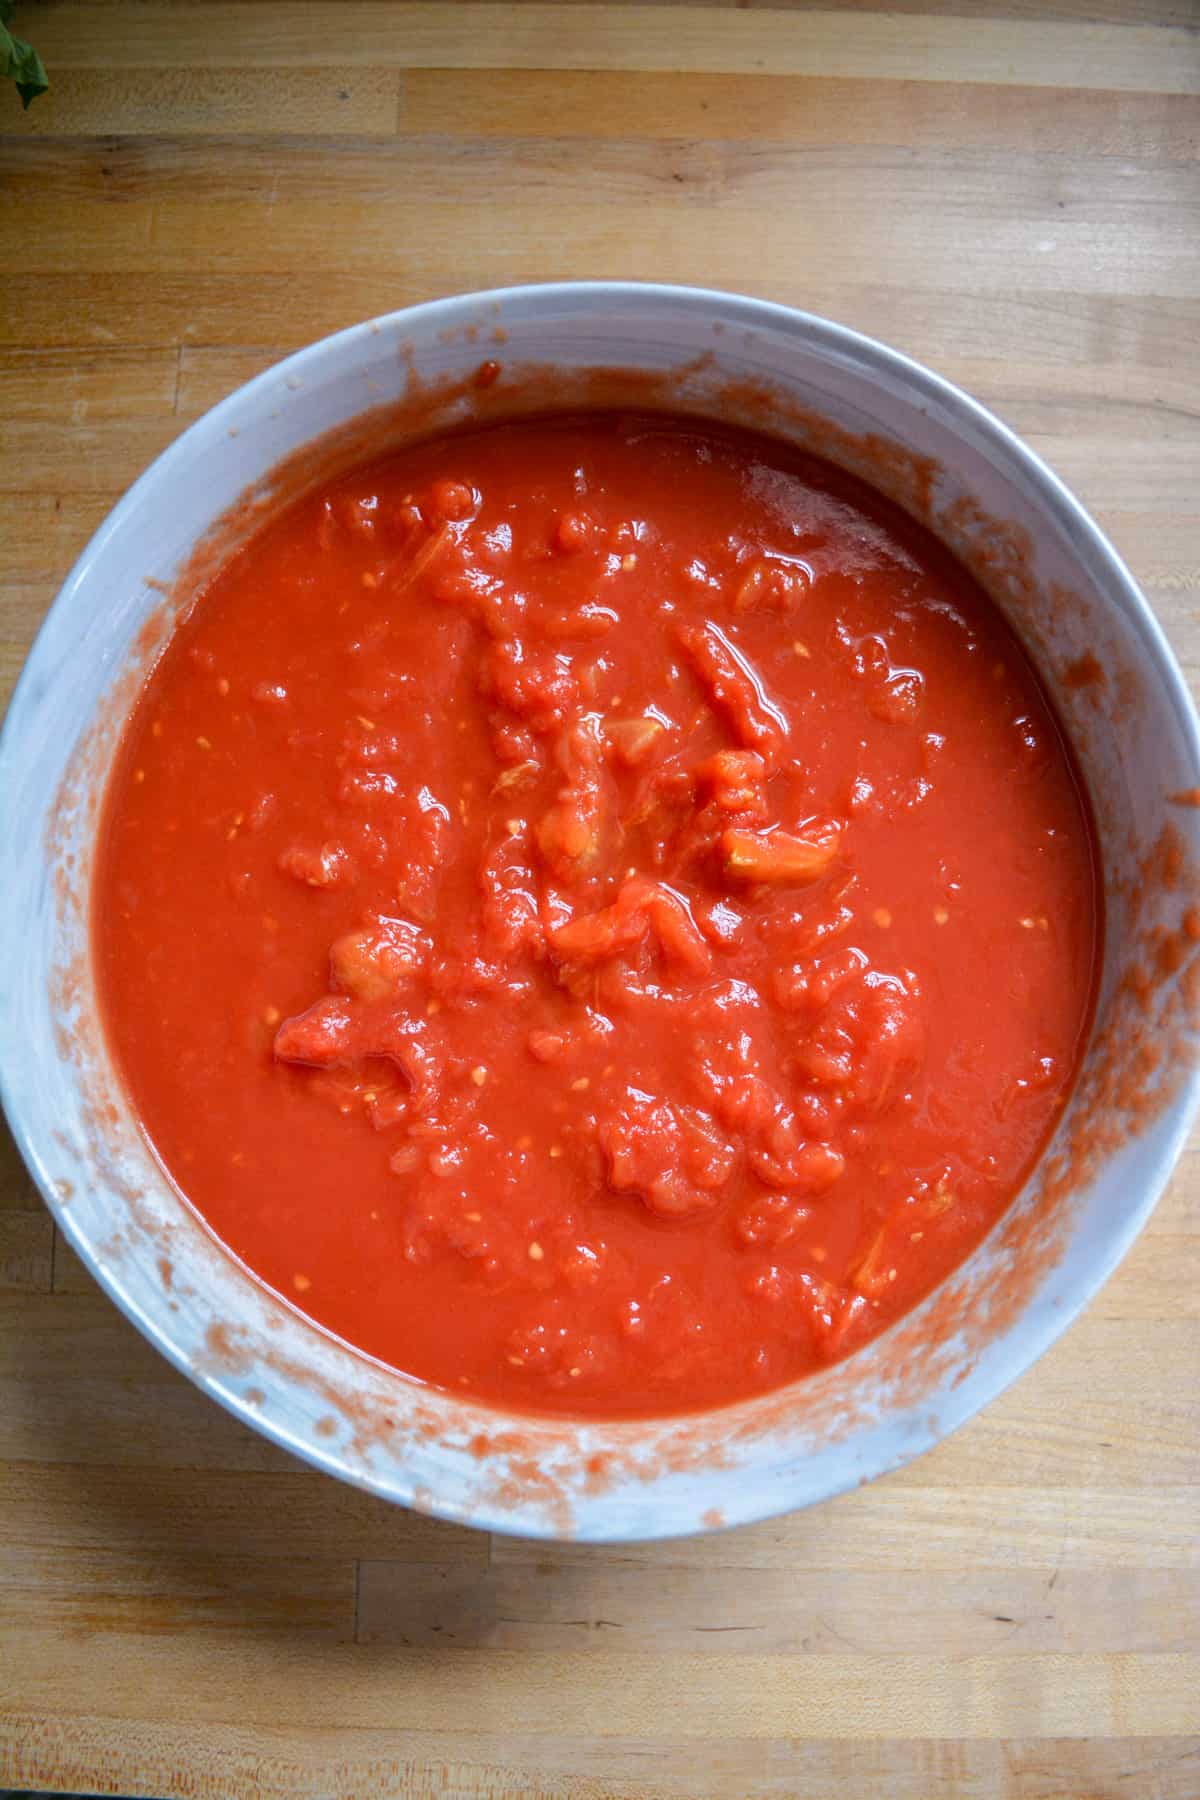 Crushed tomatoes in a large bowl on a wooden surface.